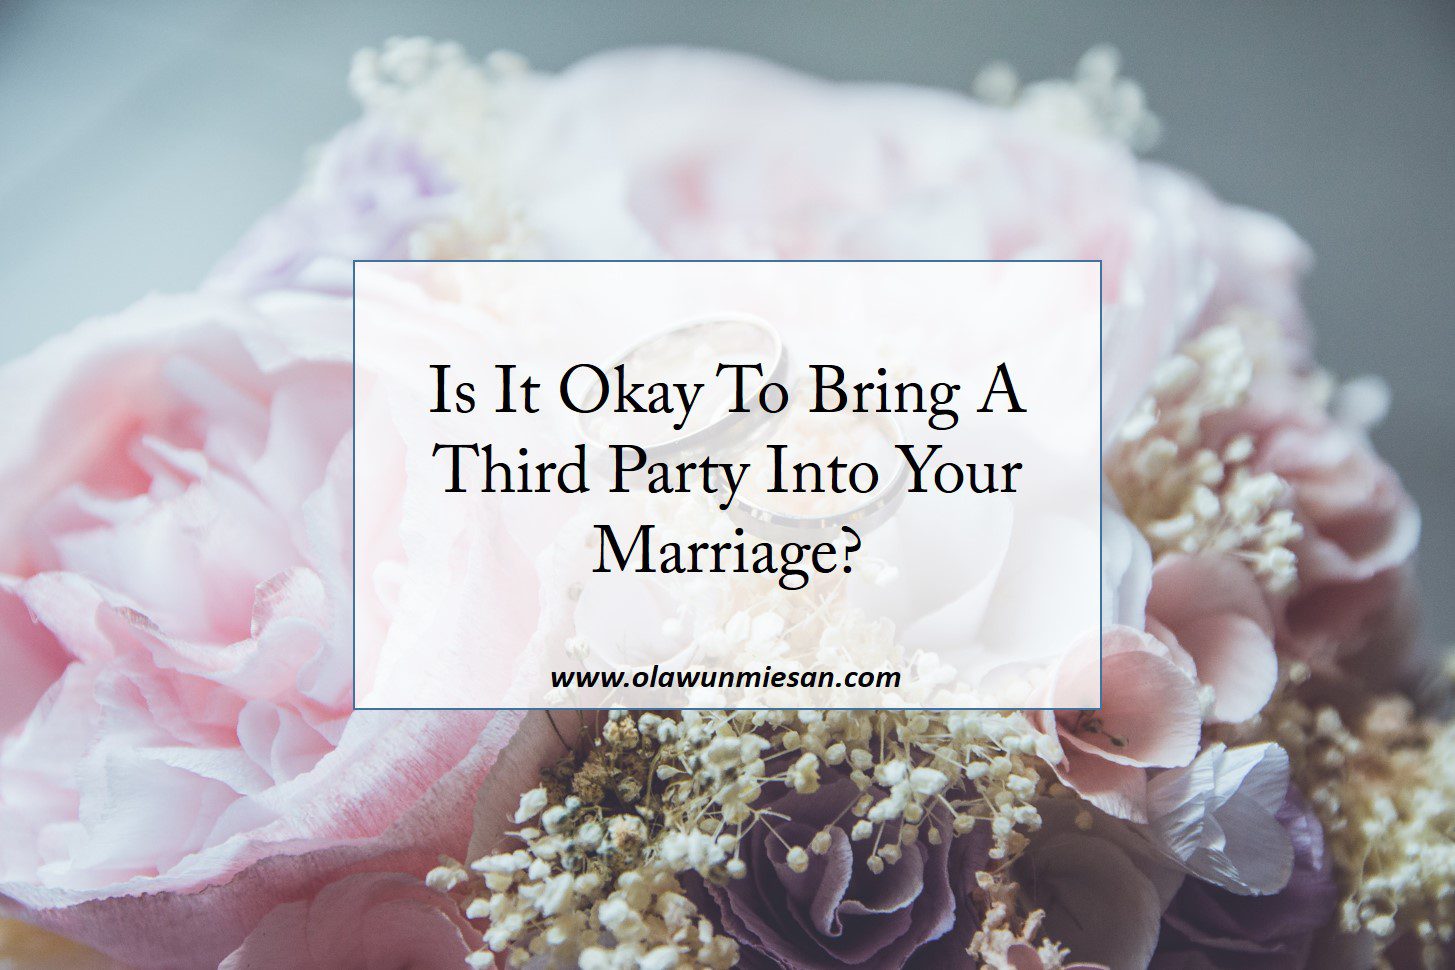 Is It Okay To Bring A Third Party Into Your Marriage?